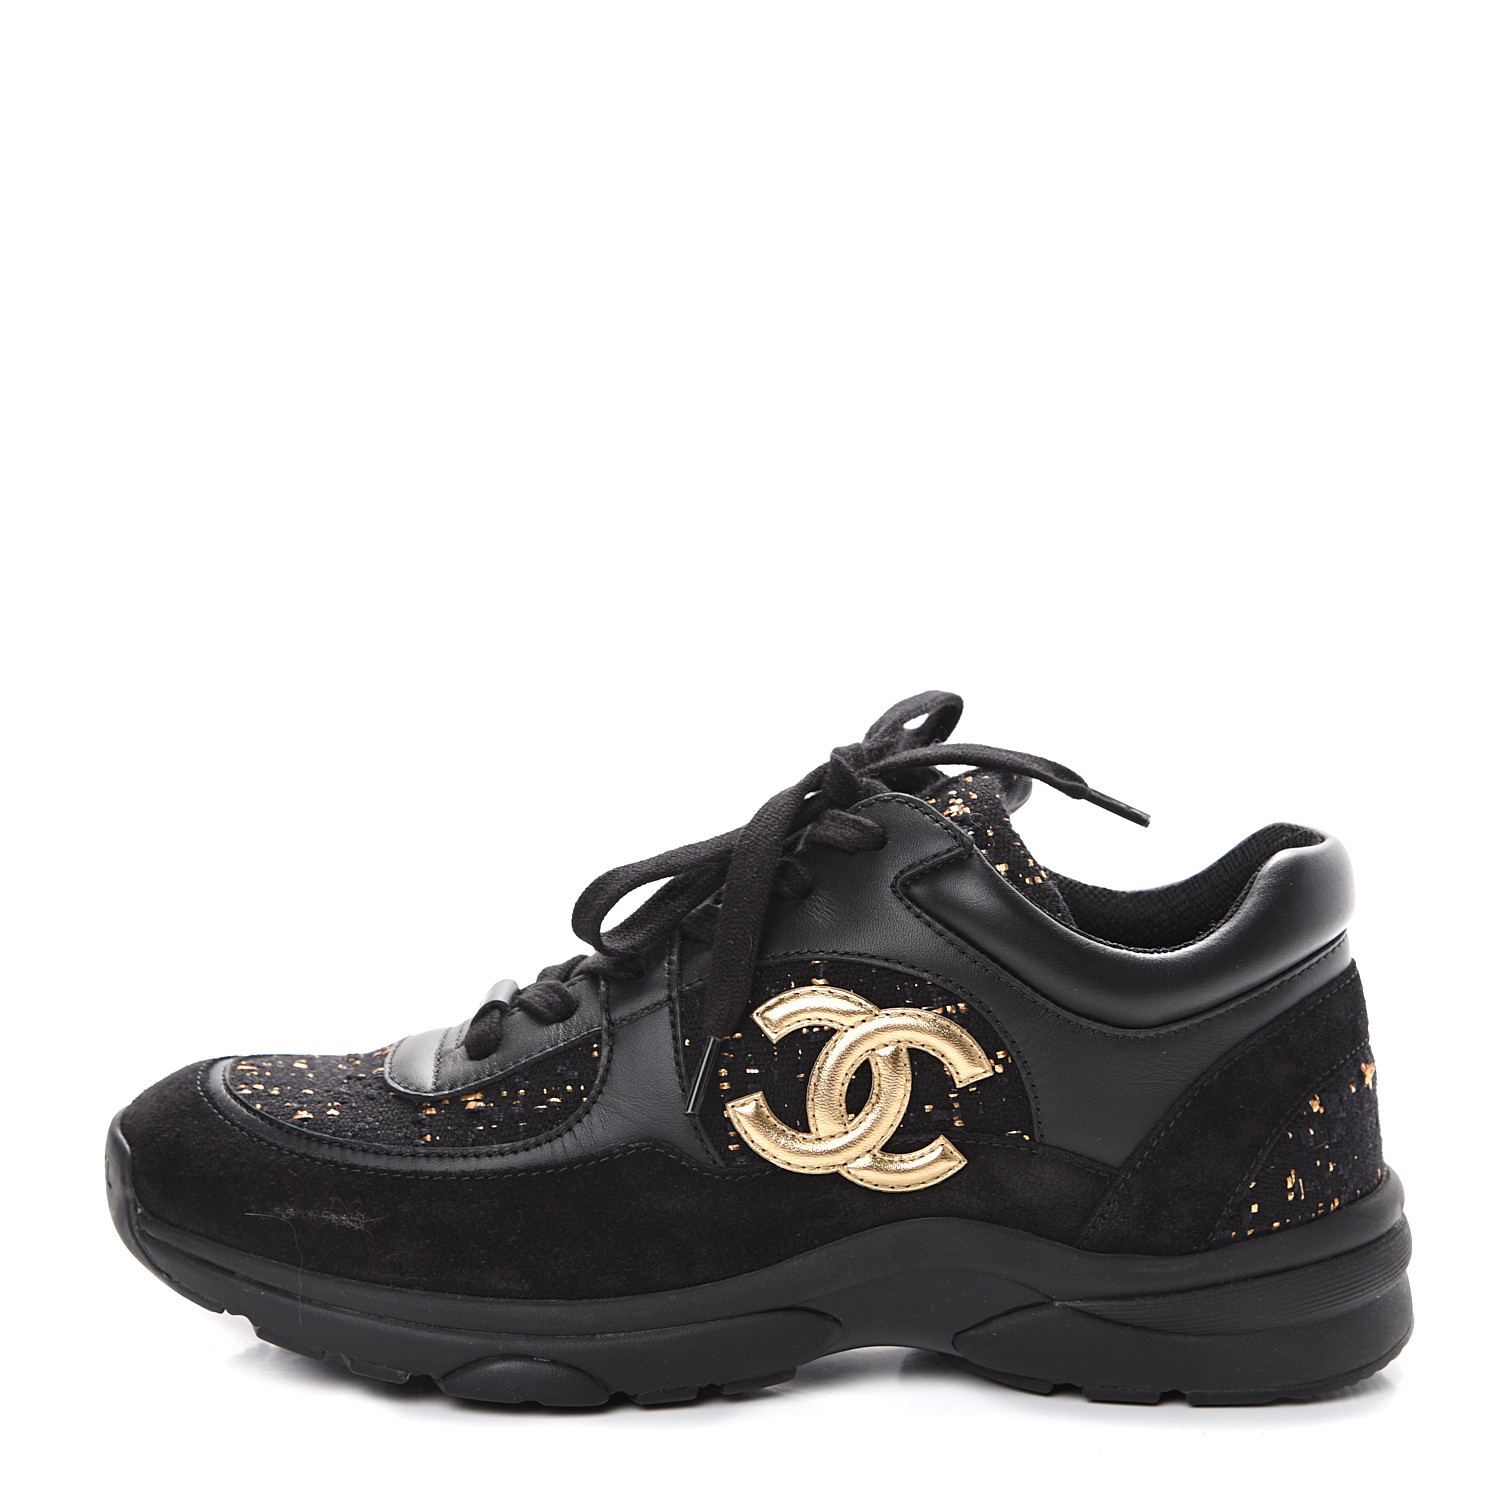 CHANEL Velour Tweed CC Sneakers 38.5 Black Gold 566105